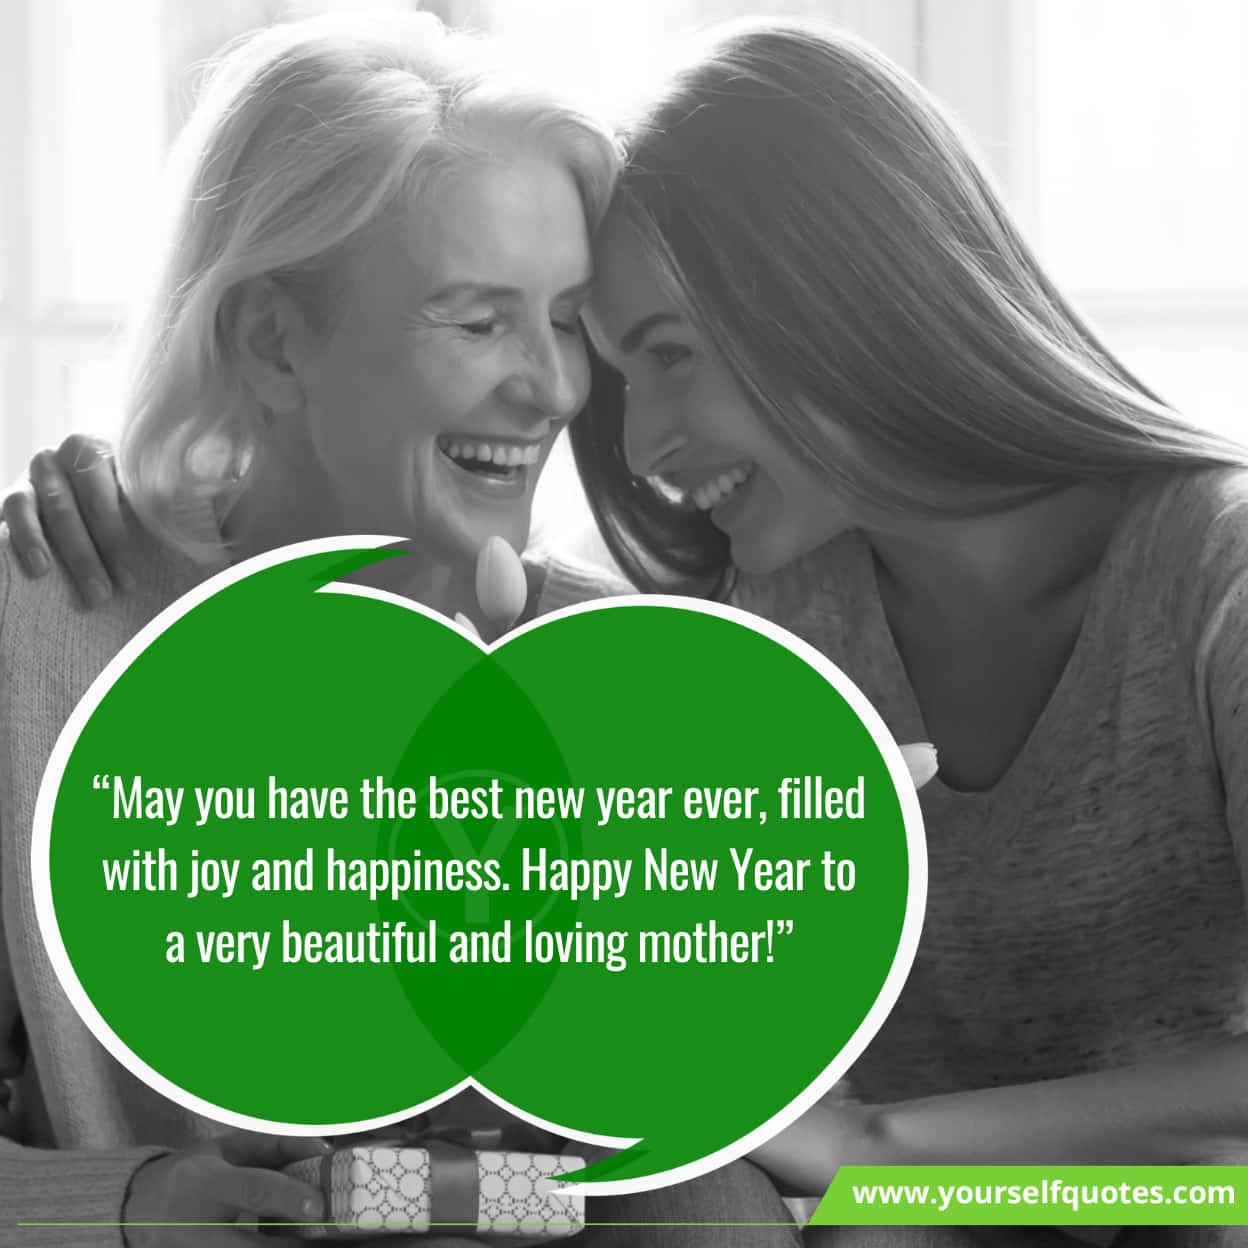 Cheerful Adorable New Year Wishes Quotes For Mother